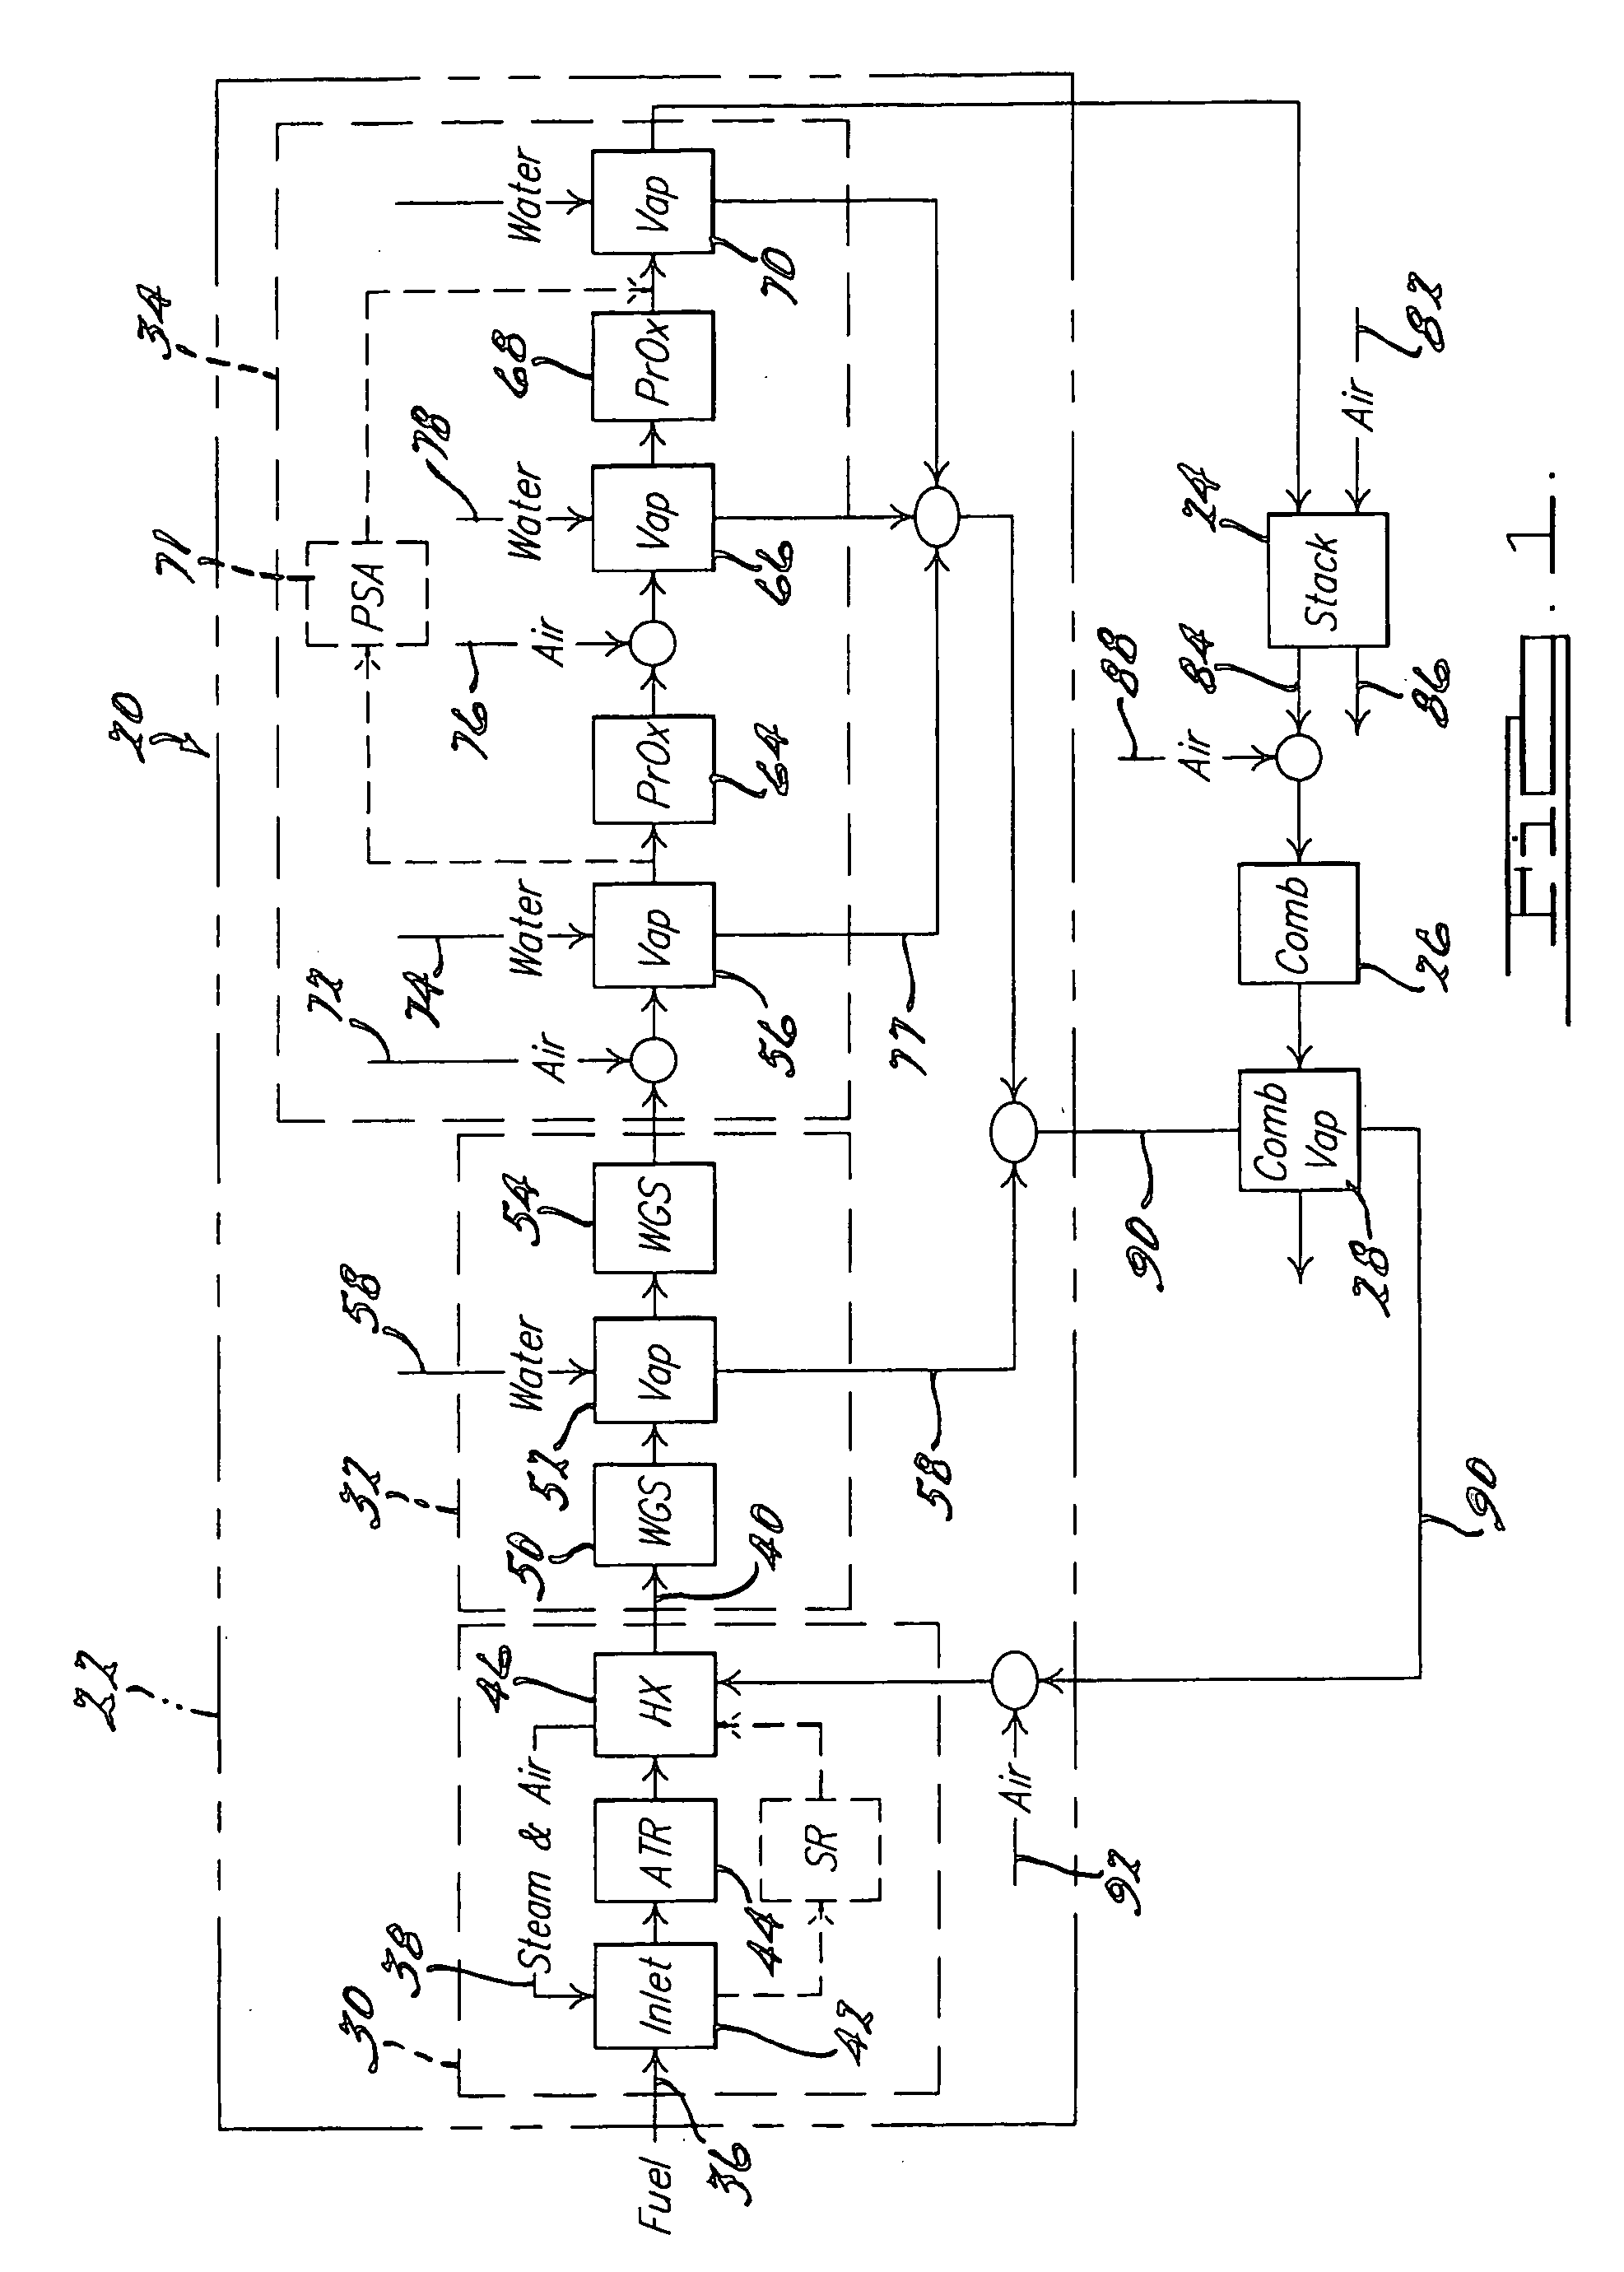 Compact water vaporizer for dynamic steam generation and uniform temperature control